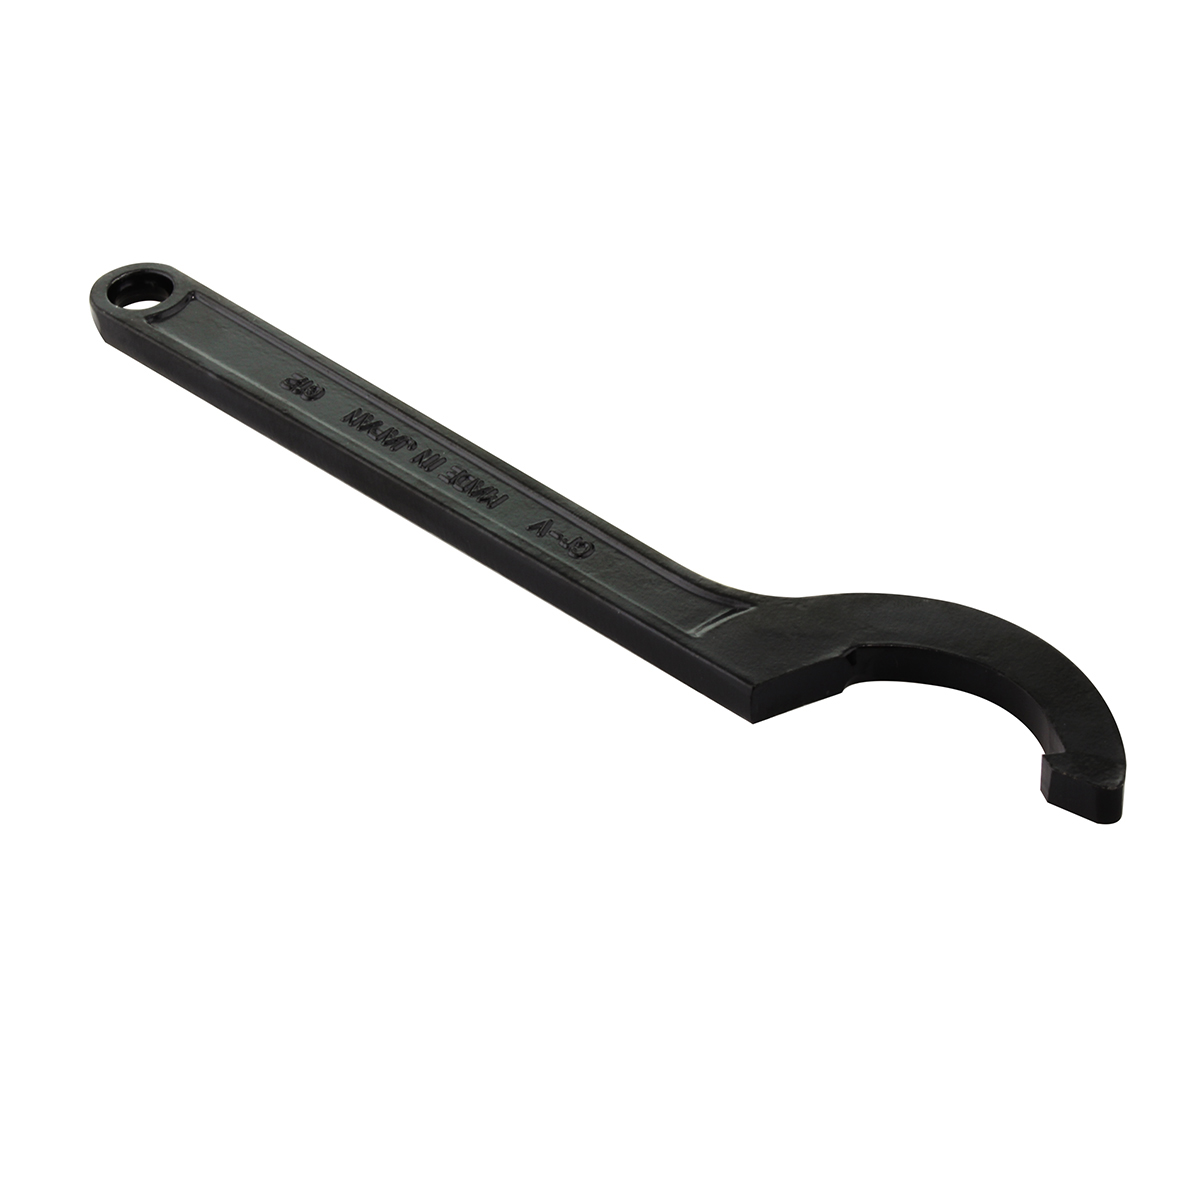 Picture for category Wrenches